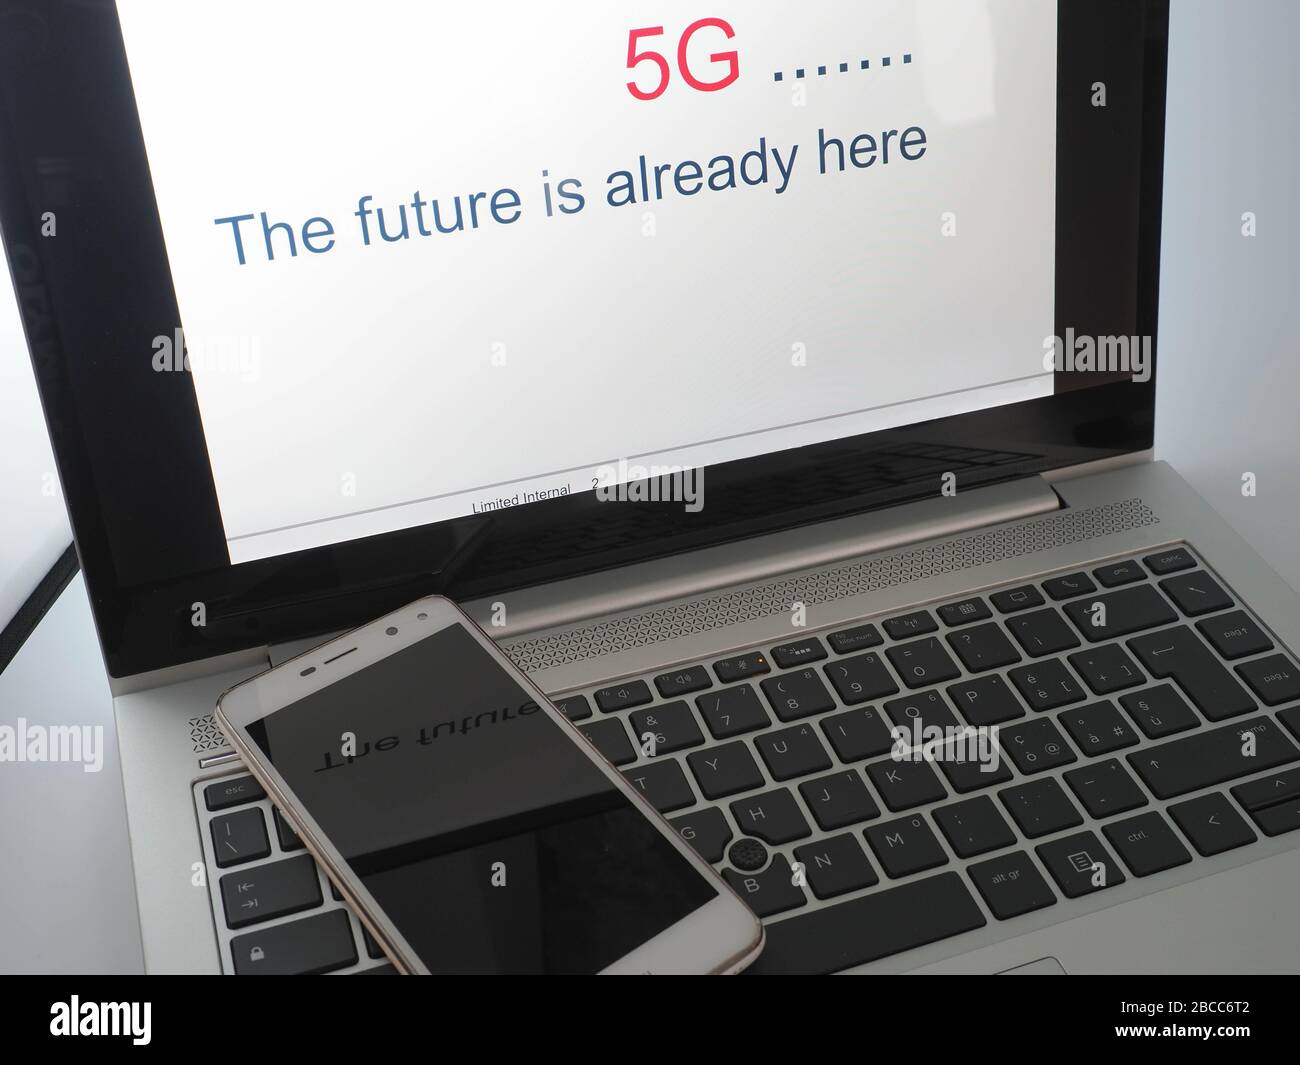 5G technology for the future, laptop and smartphone Stock Photo